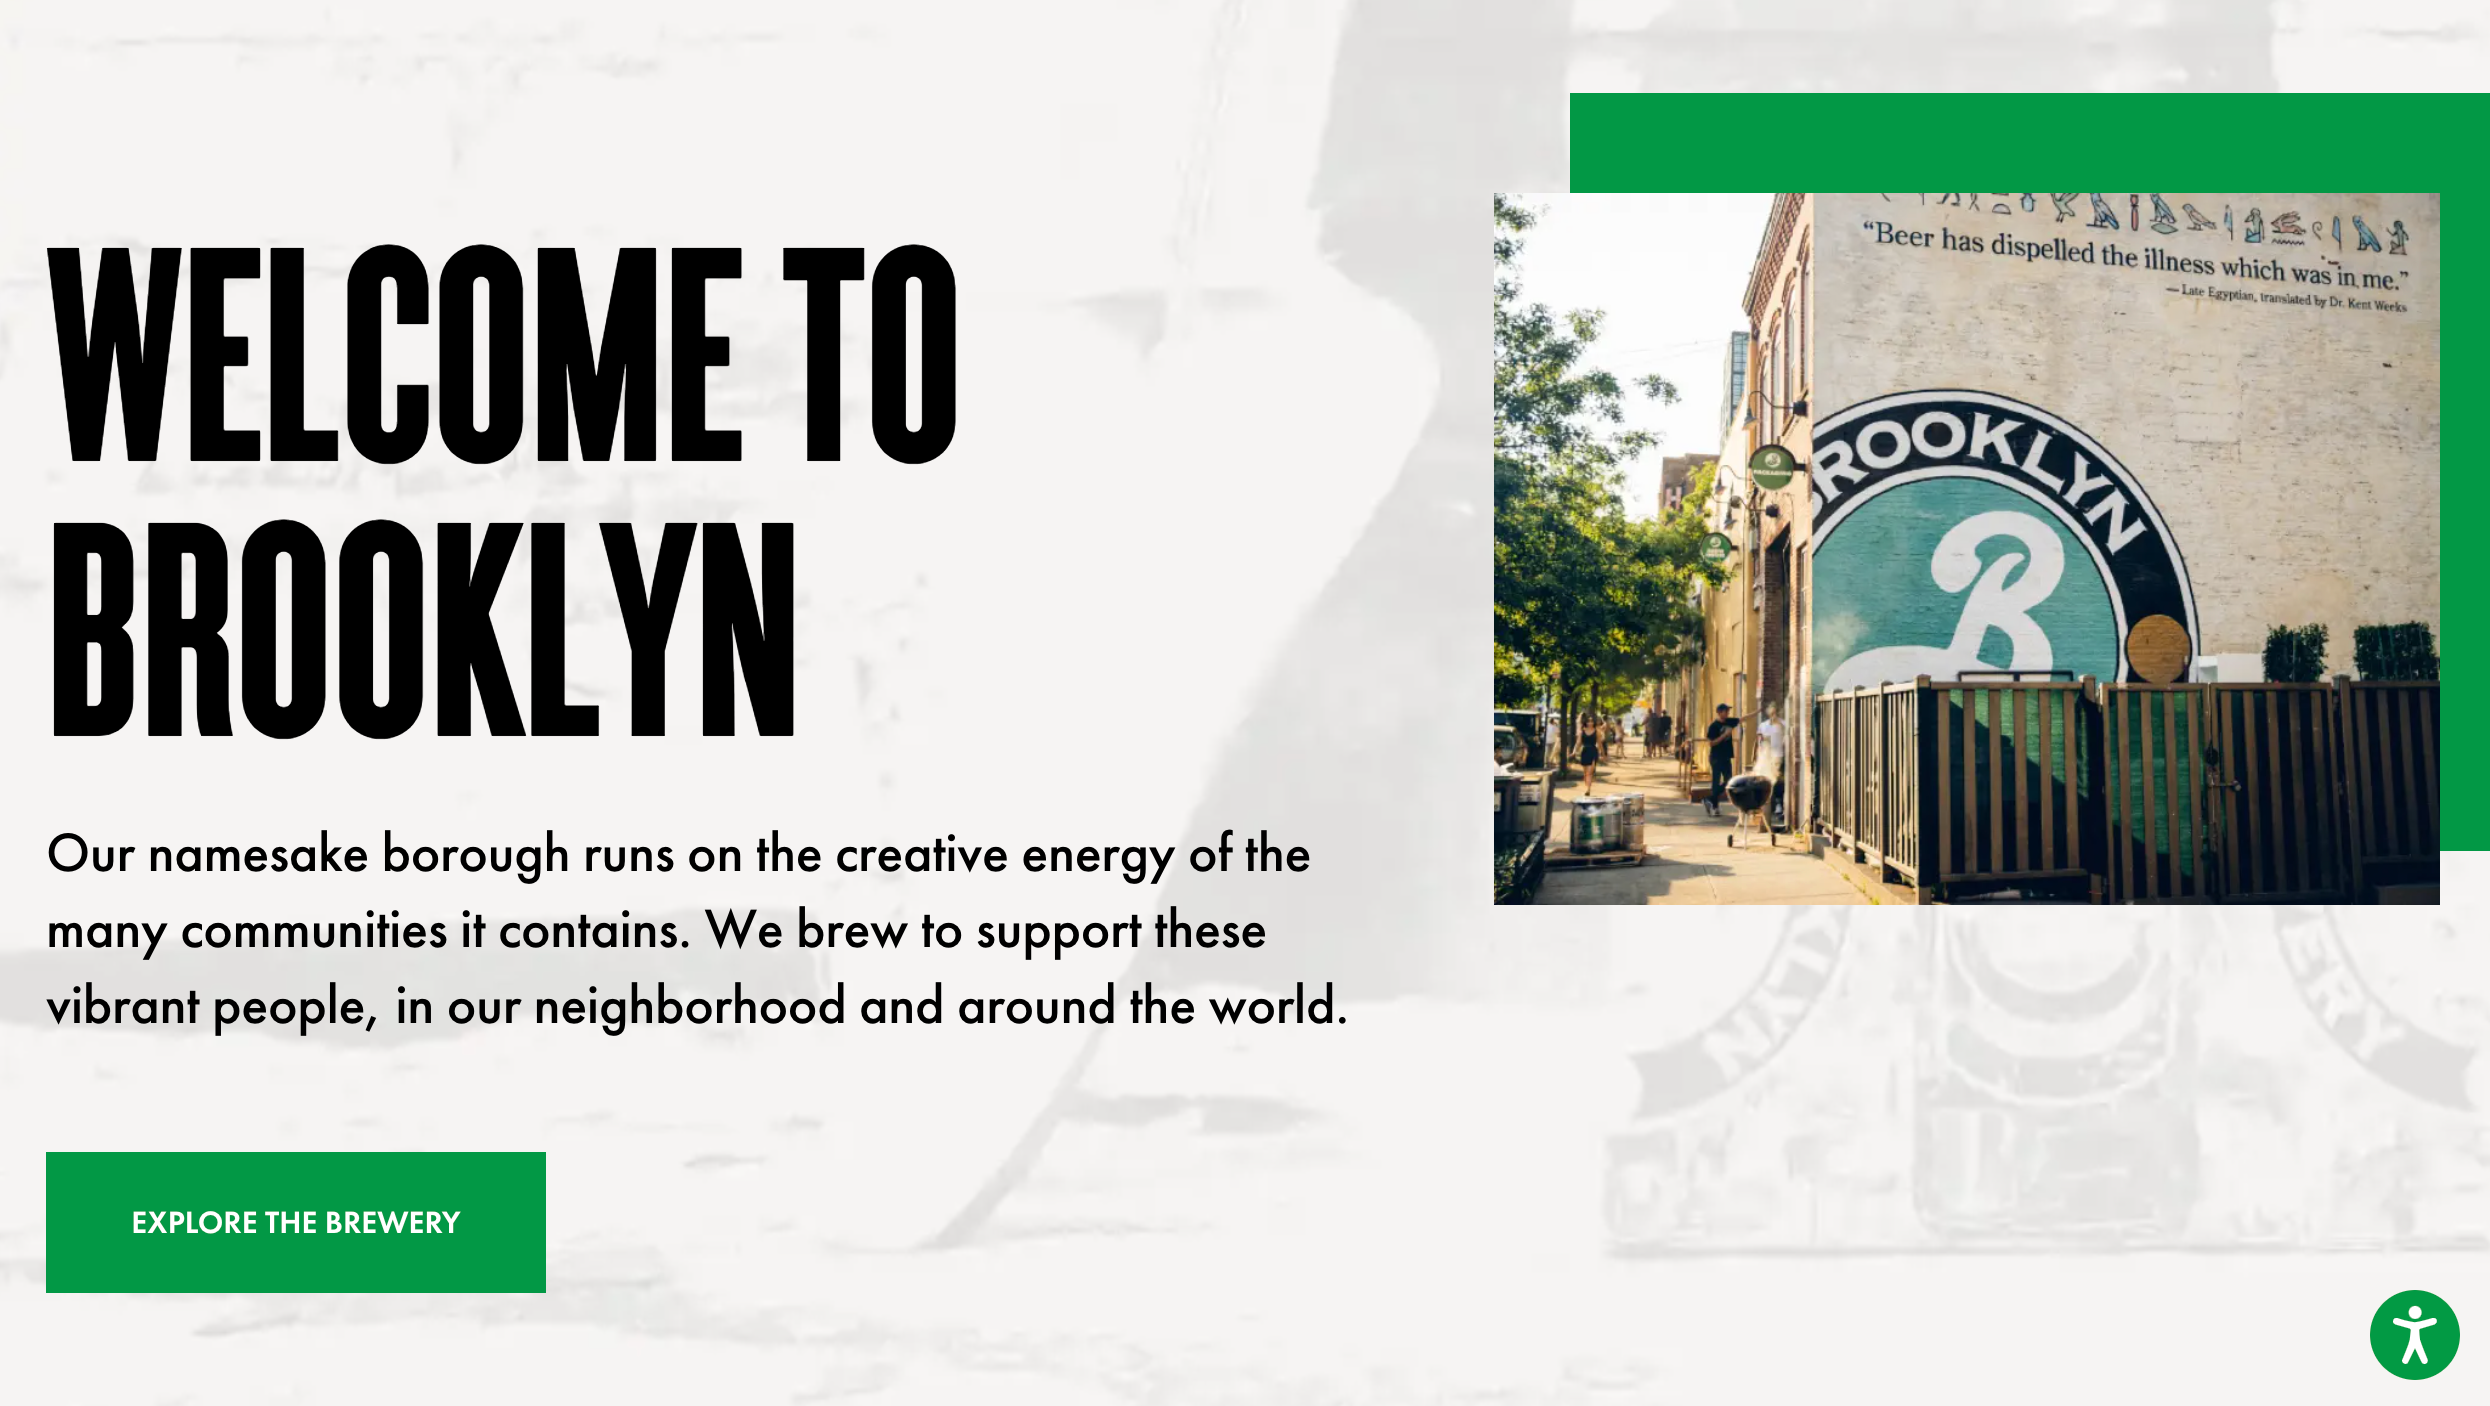 Brooklyn Brewery's homepage, which features imagery of the exterior of the business.